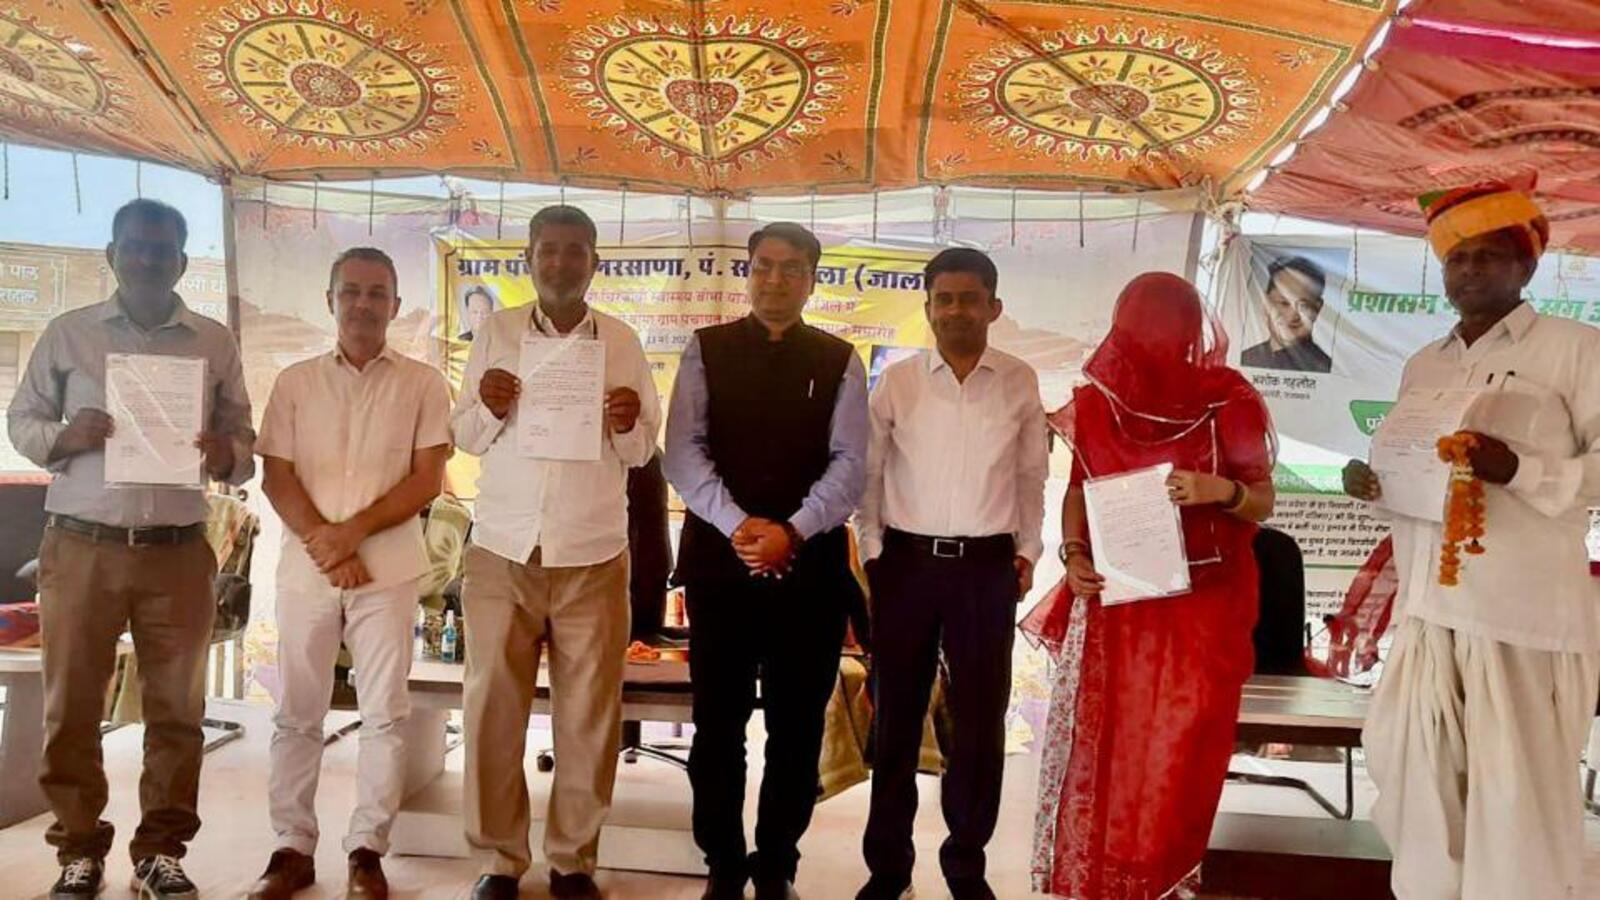 Narsana village becomes first in Rajasthan with 100% health insurance cover